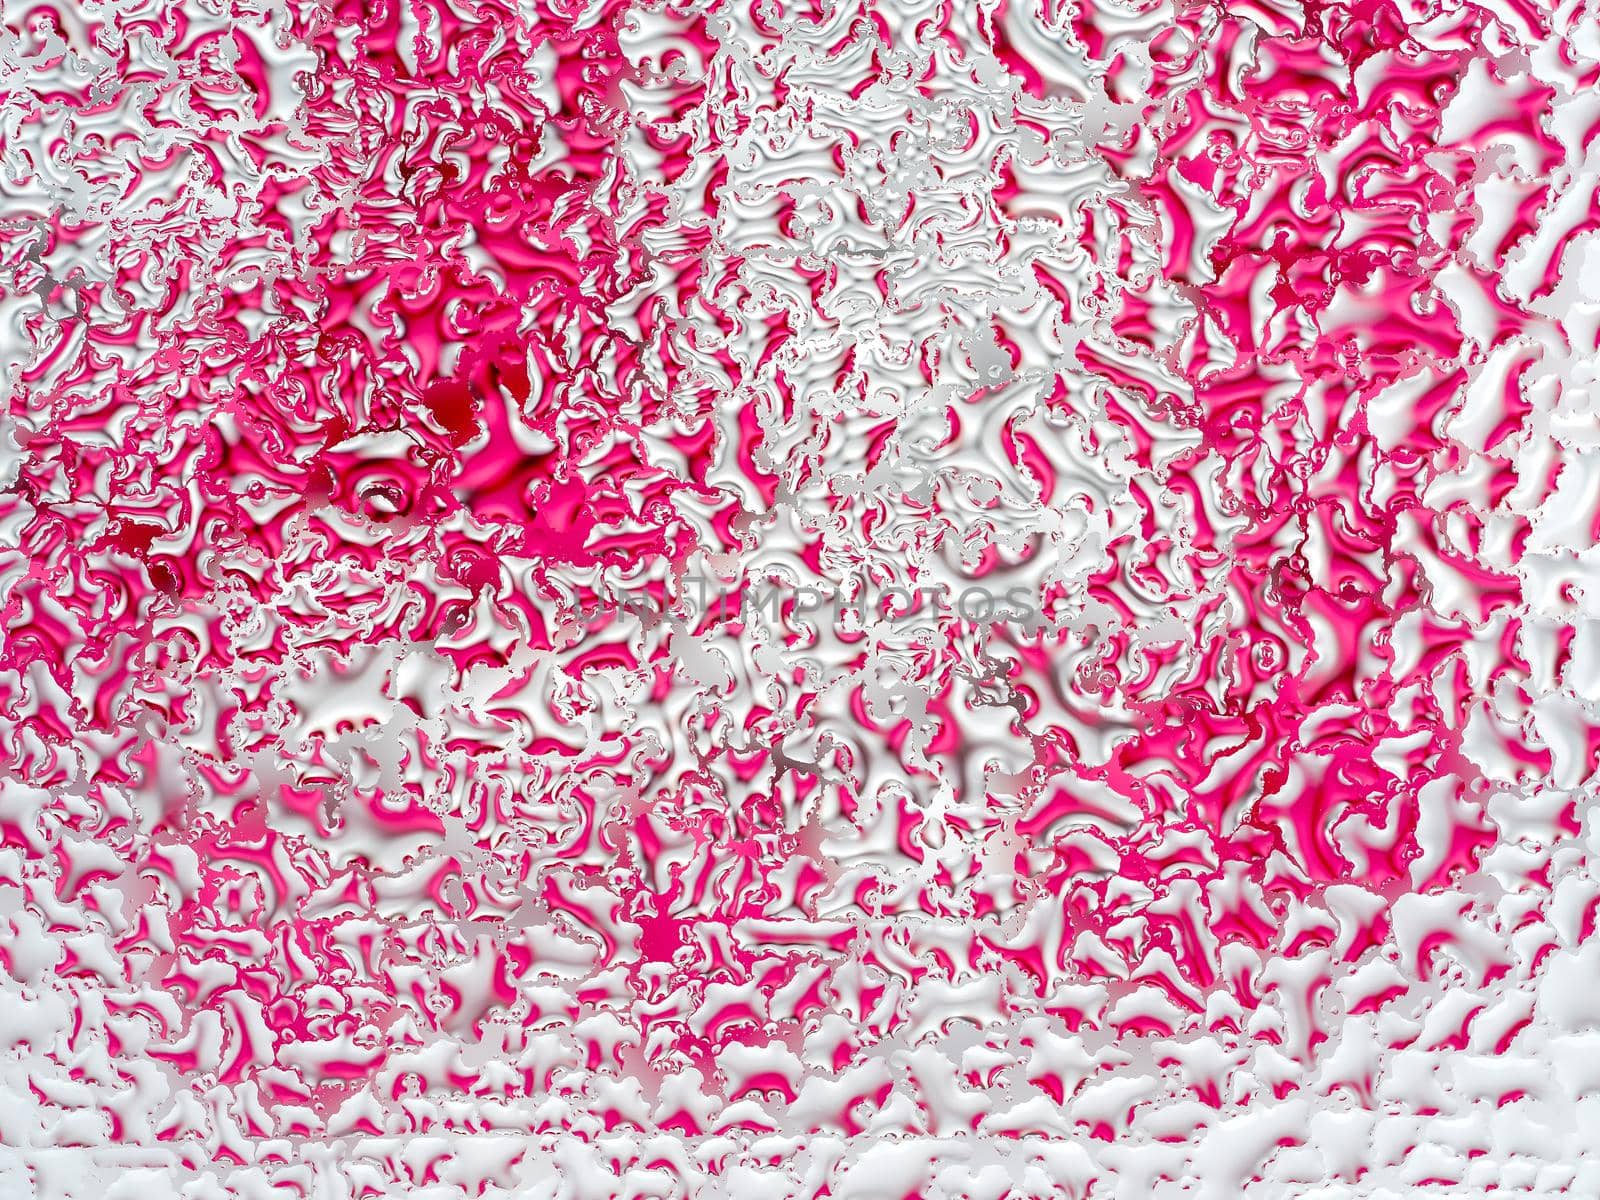 Abstract pink and white background with large and small convex drops of water on glass, condensation on window. Macro, close up.